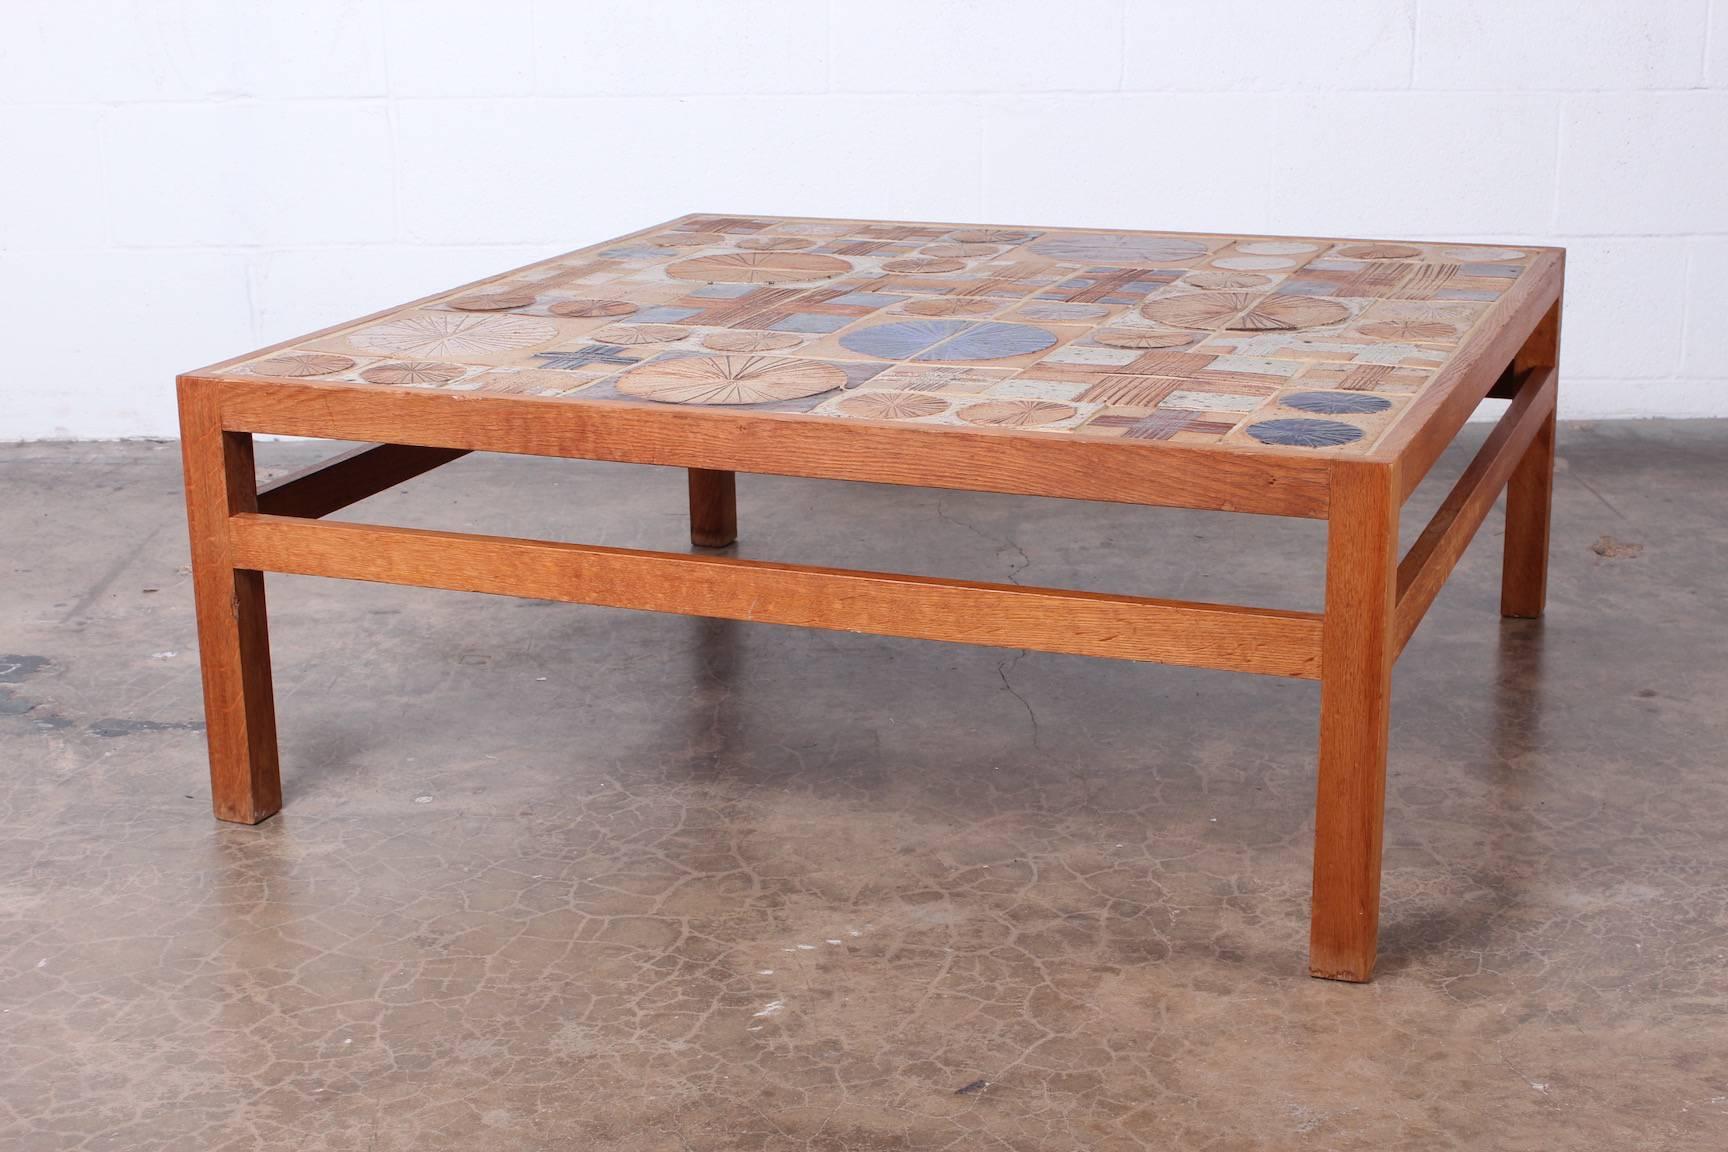 Coffee Table with Ceramic Tiles by Tue Poulsen & Willy Beck 1